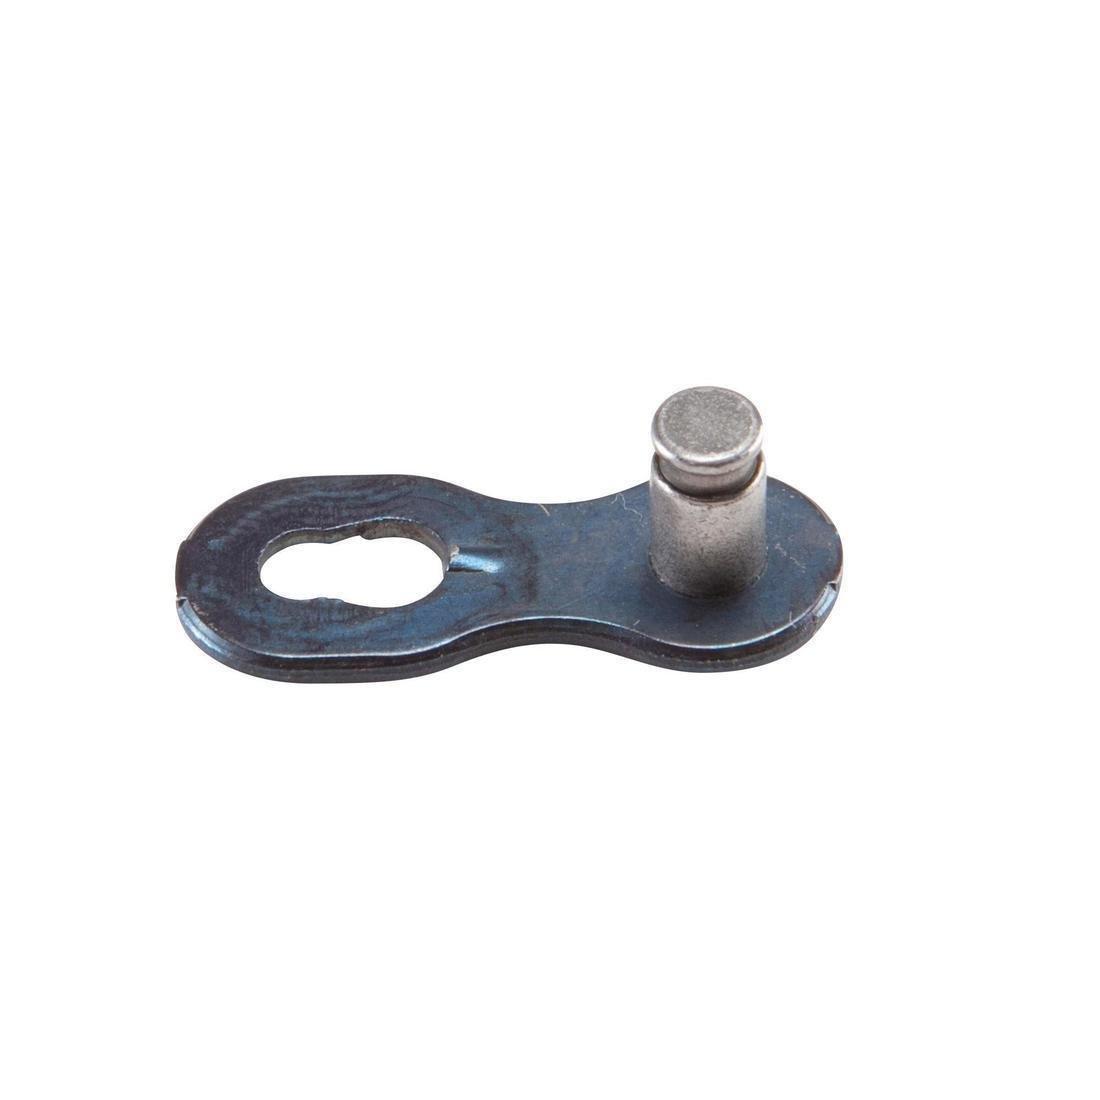 DECATHLON - 3, to 8-Speed Quick Release Chain Links